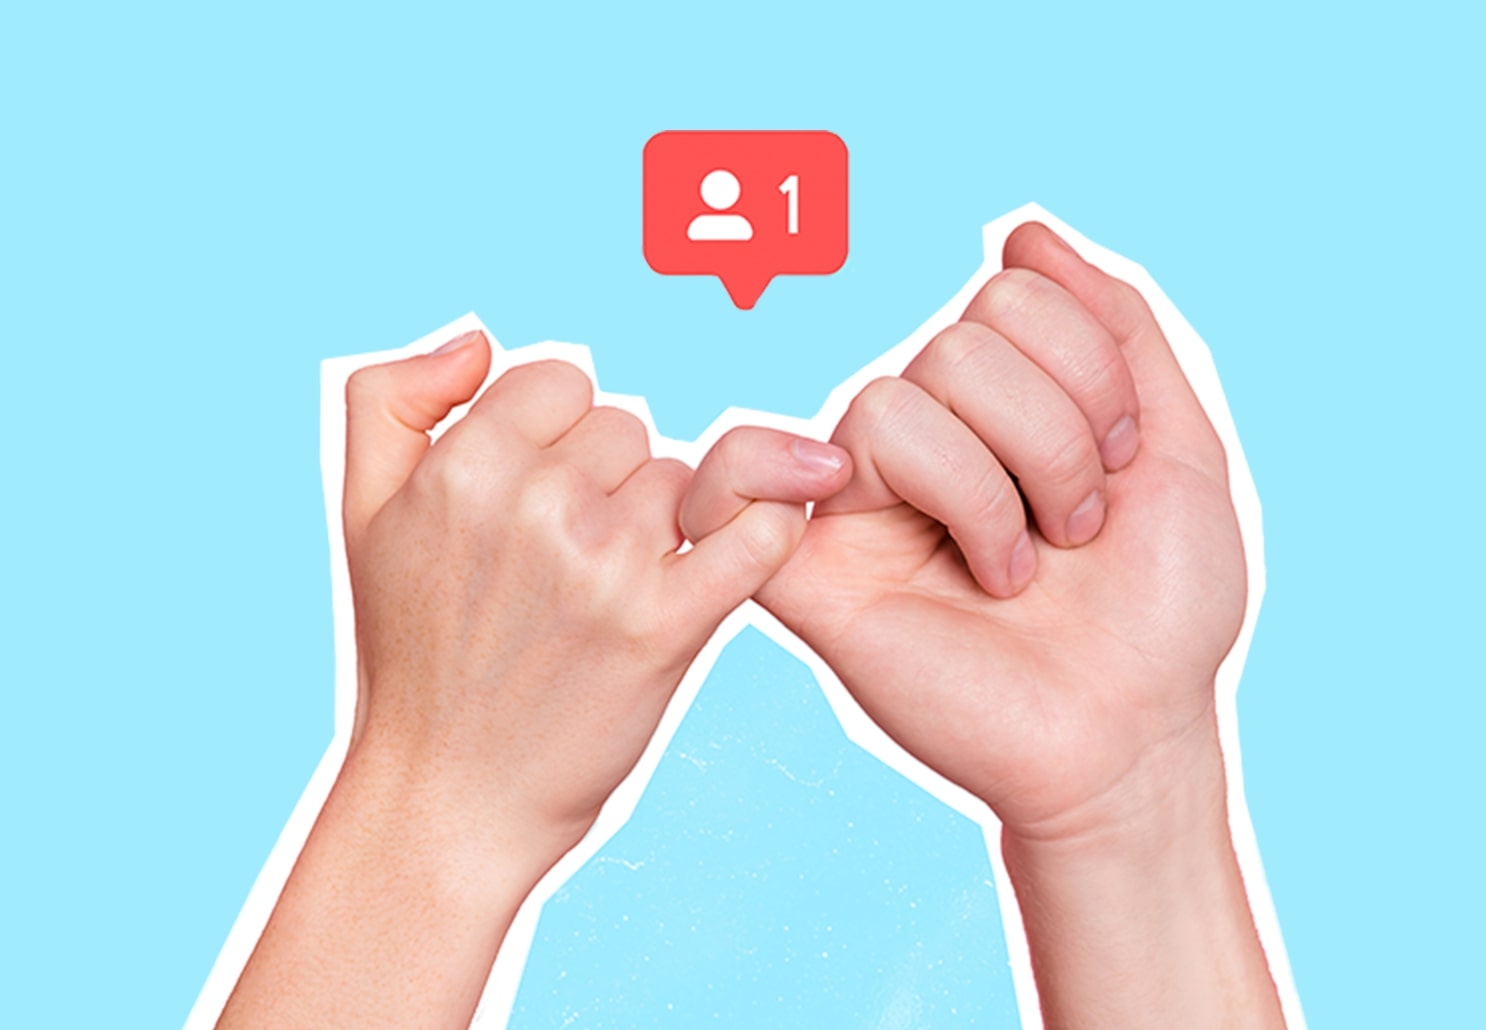 5 ways to engage with your followers and increase your follower count